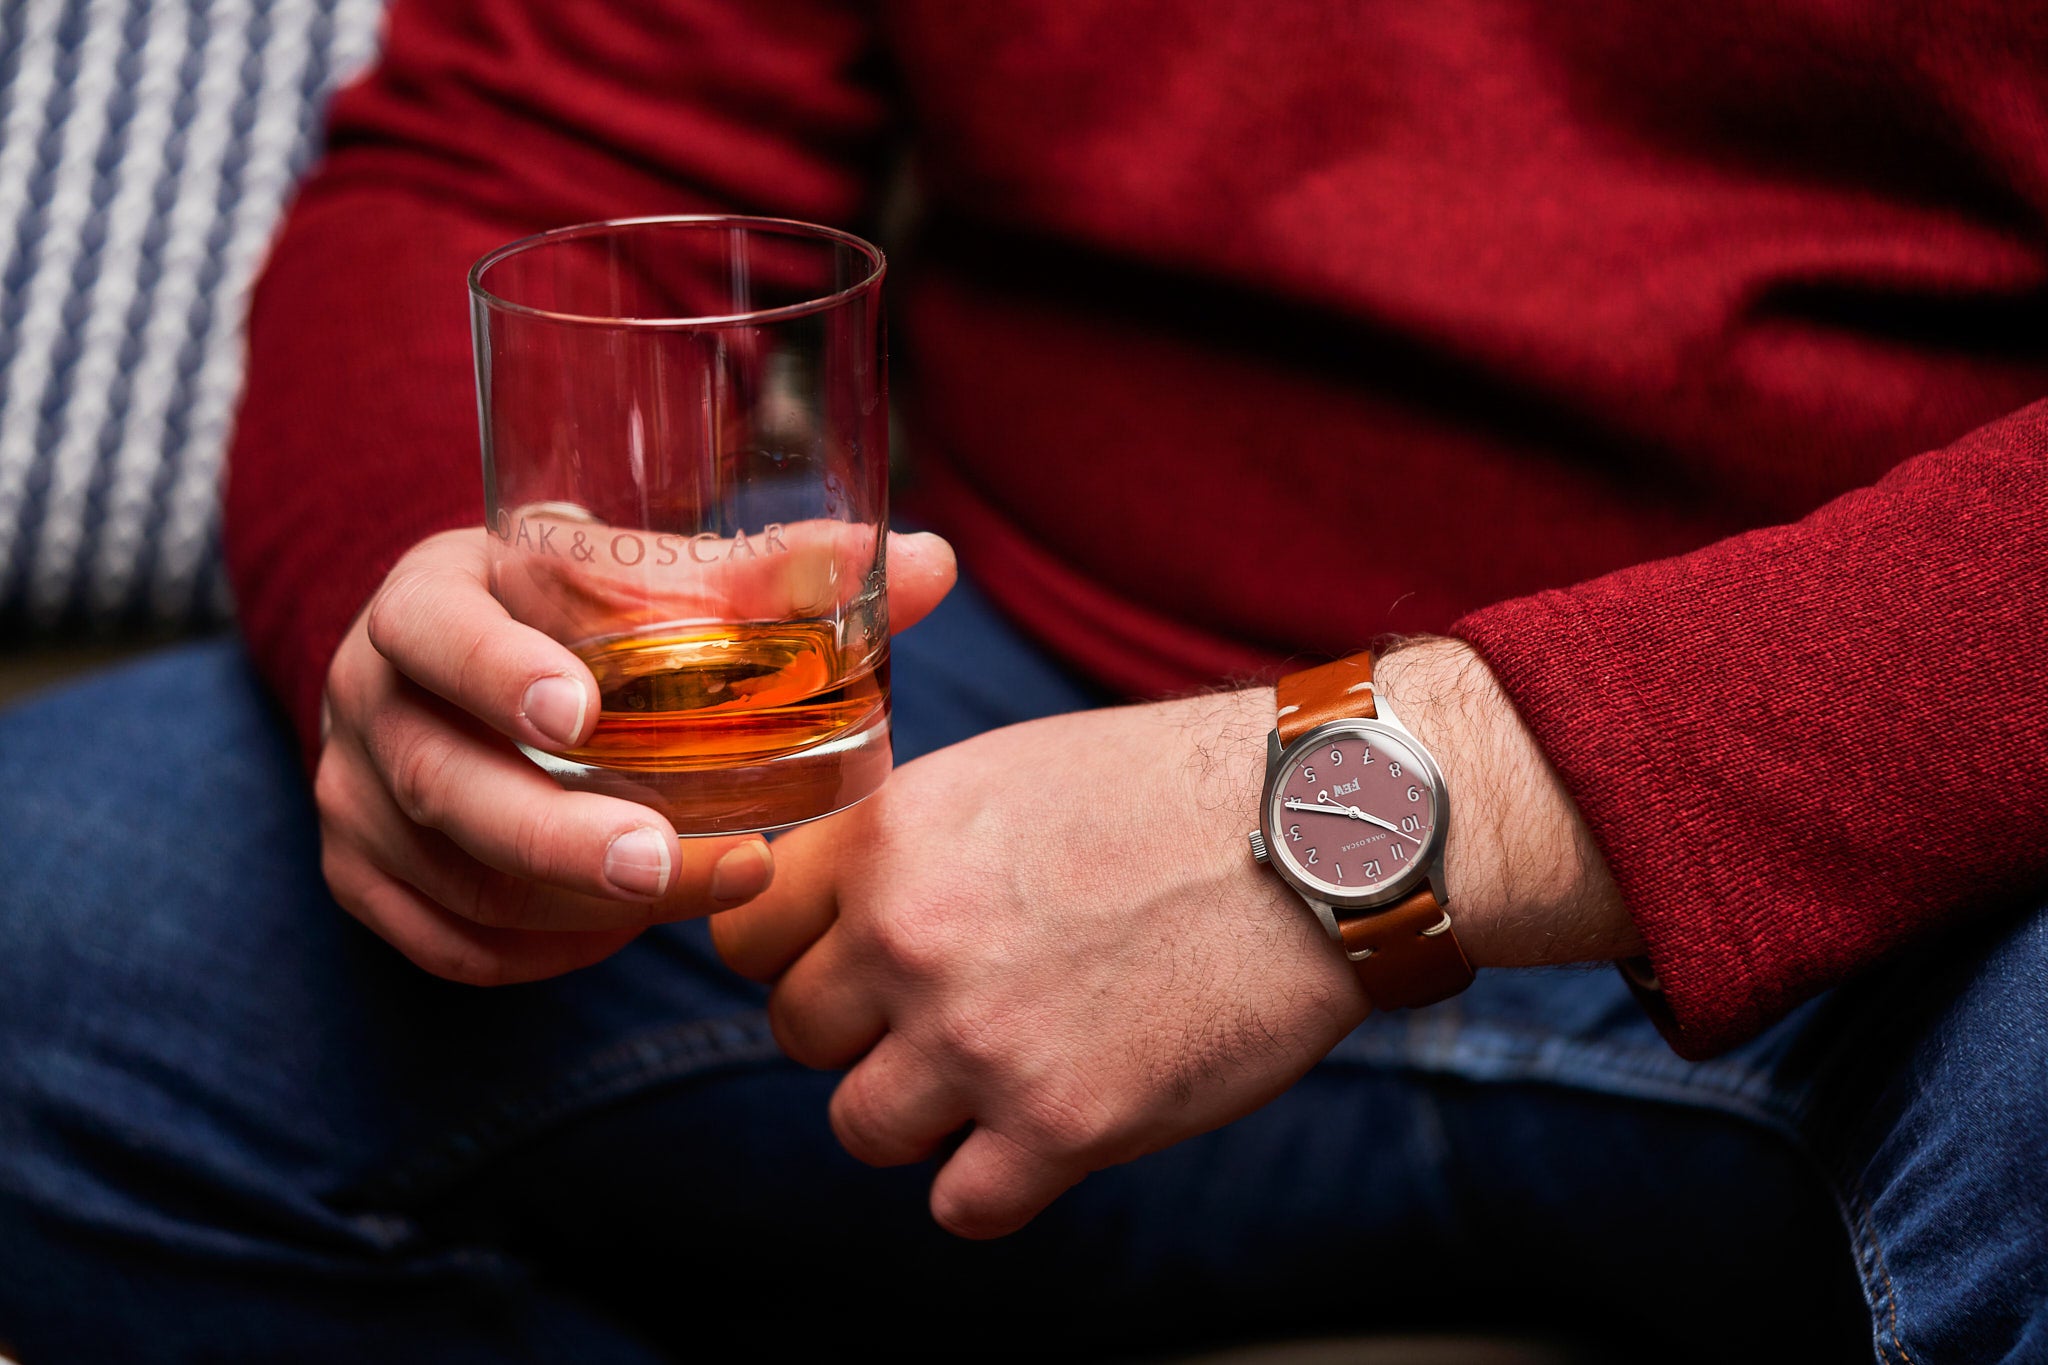 Image of man wearing red sweater holding glass of bourbon while wearing the Olmsted FEW edition with a salmon dial.